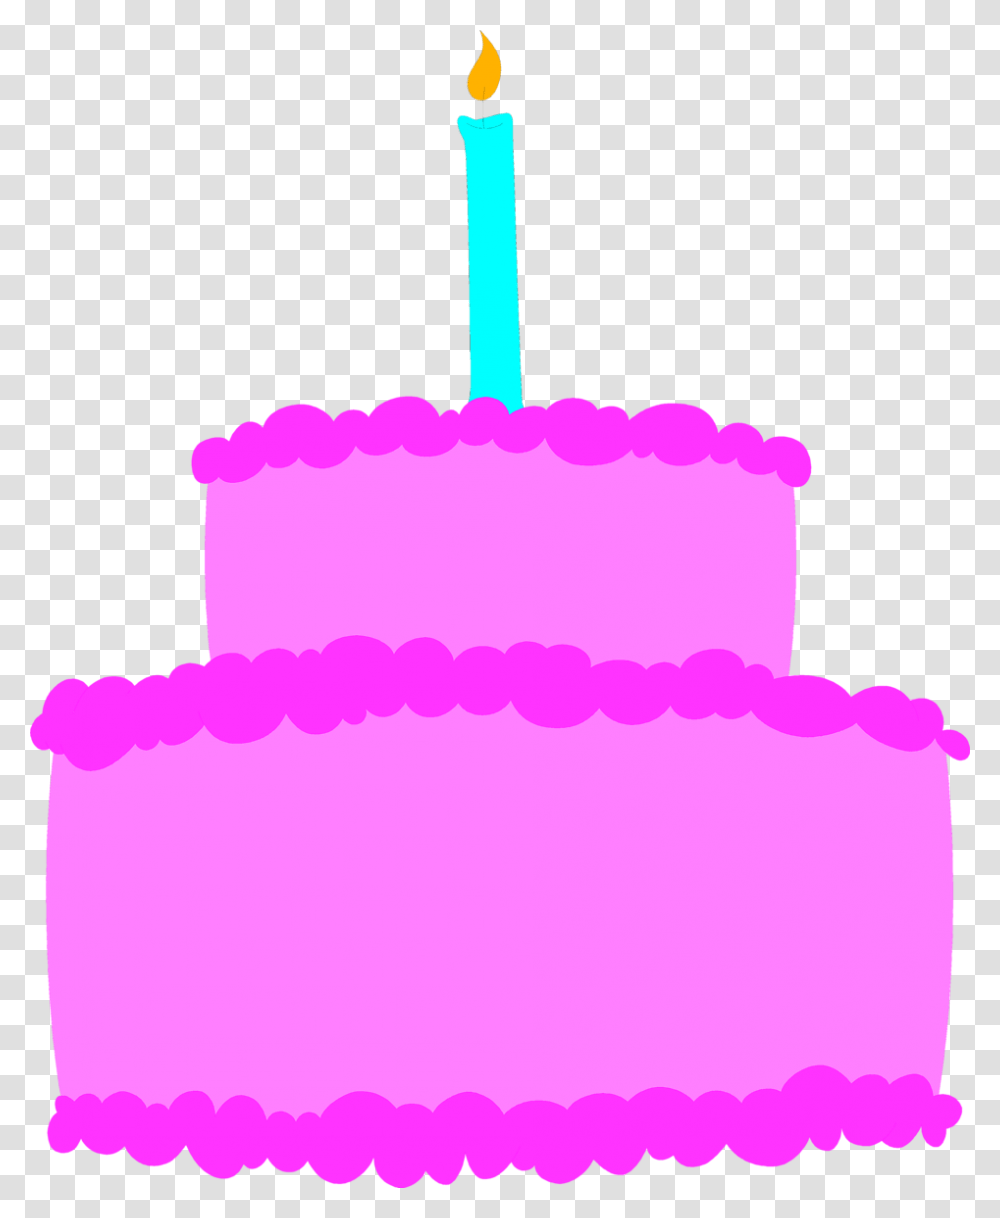 Cake Clipart Free Look, Dessert, Food, Birthday Cake, Icing Transparent Png